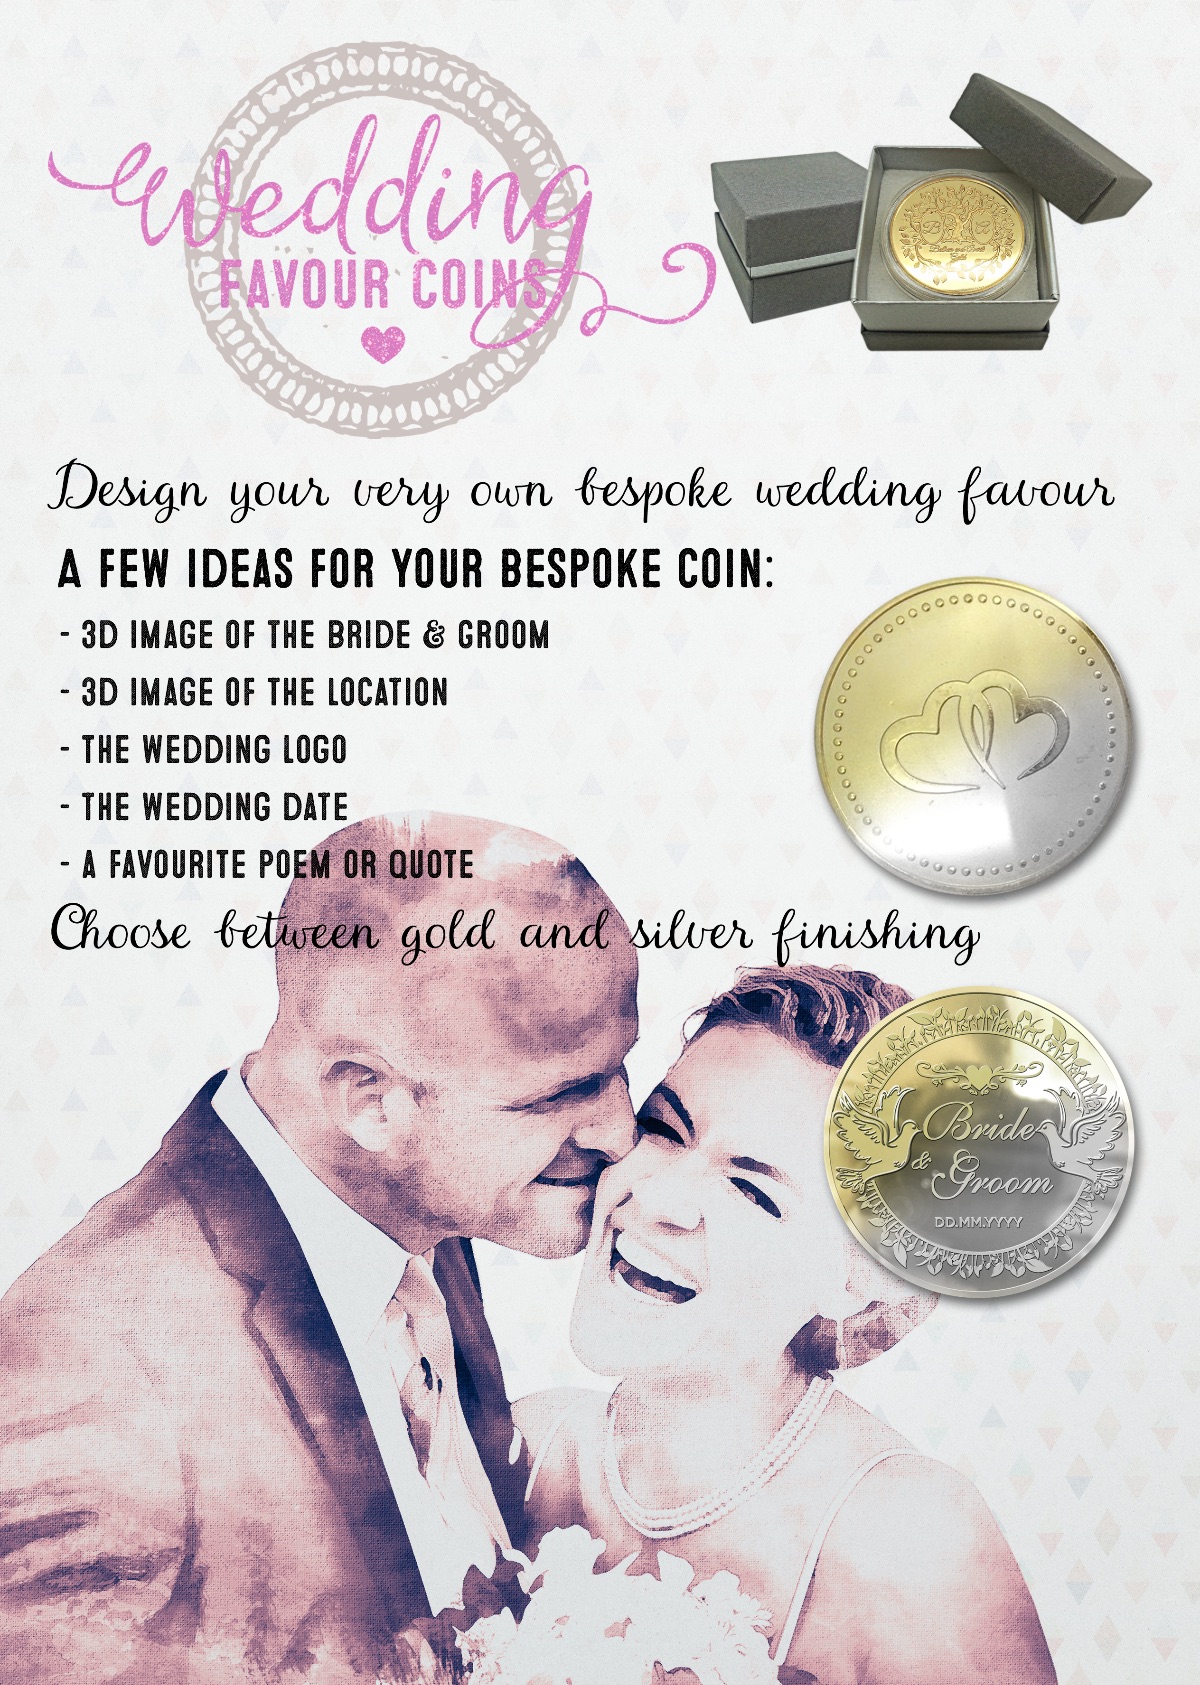 The Wedding Favour Coins-Image-6